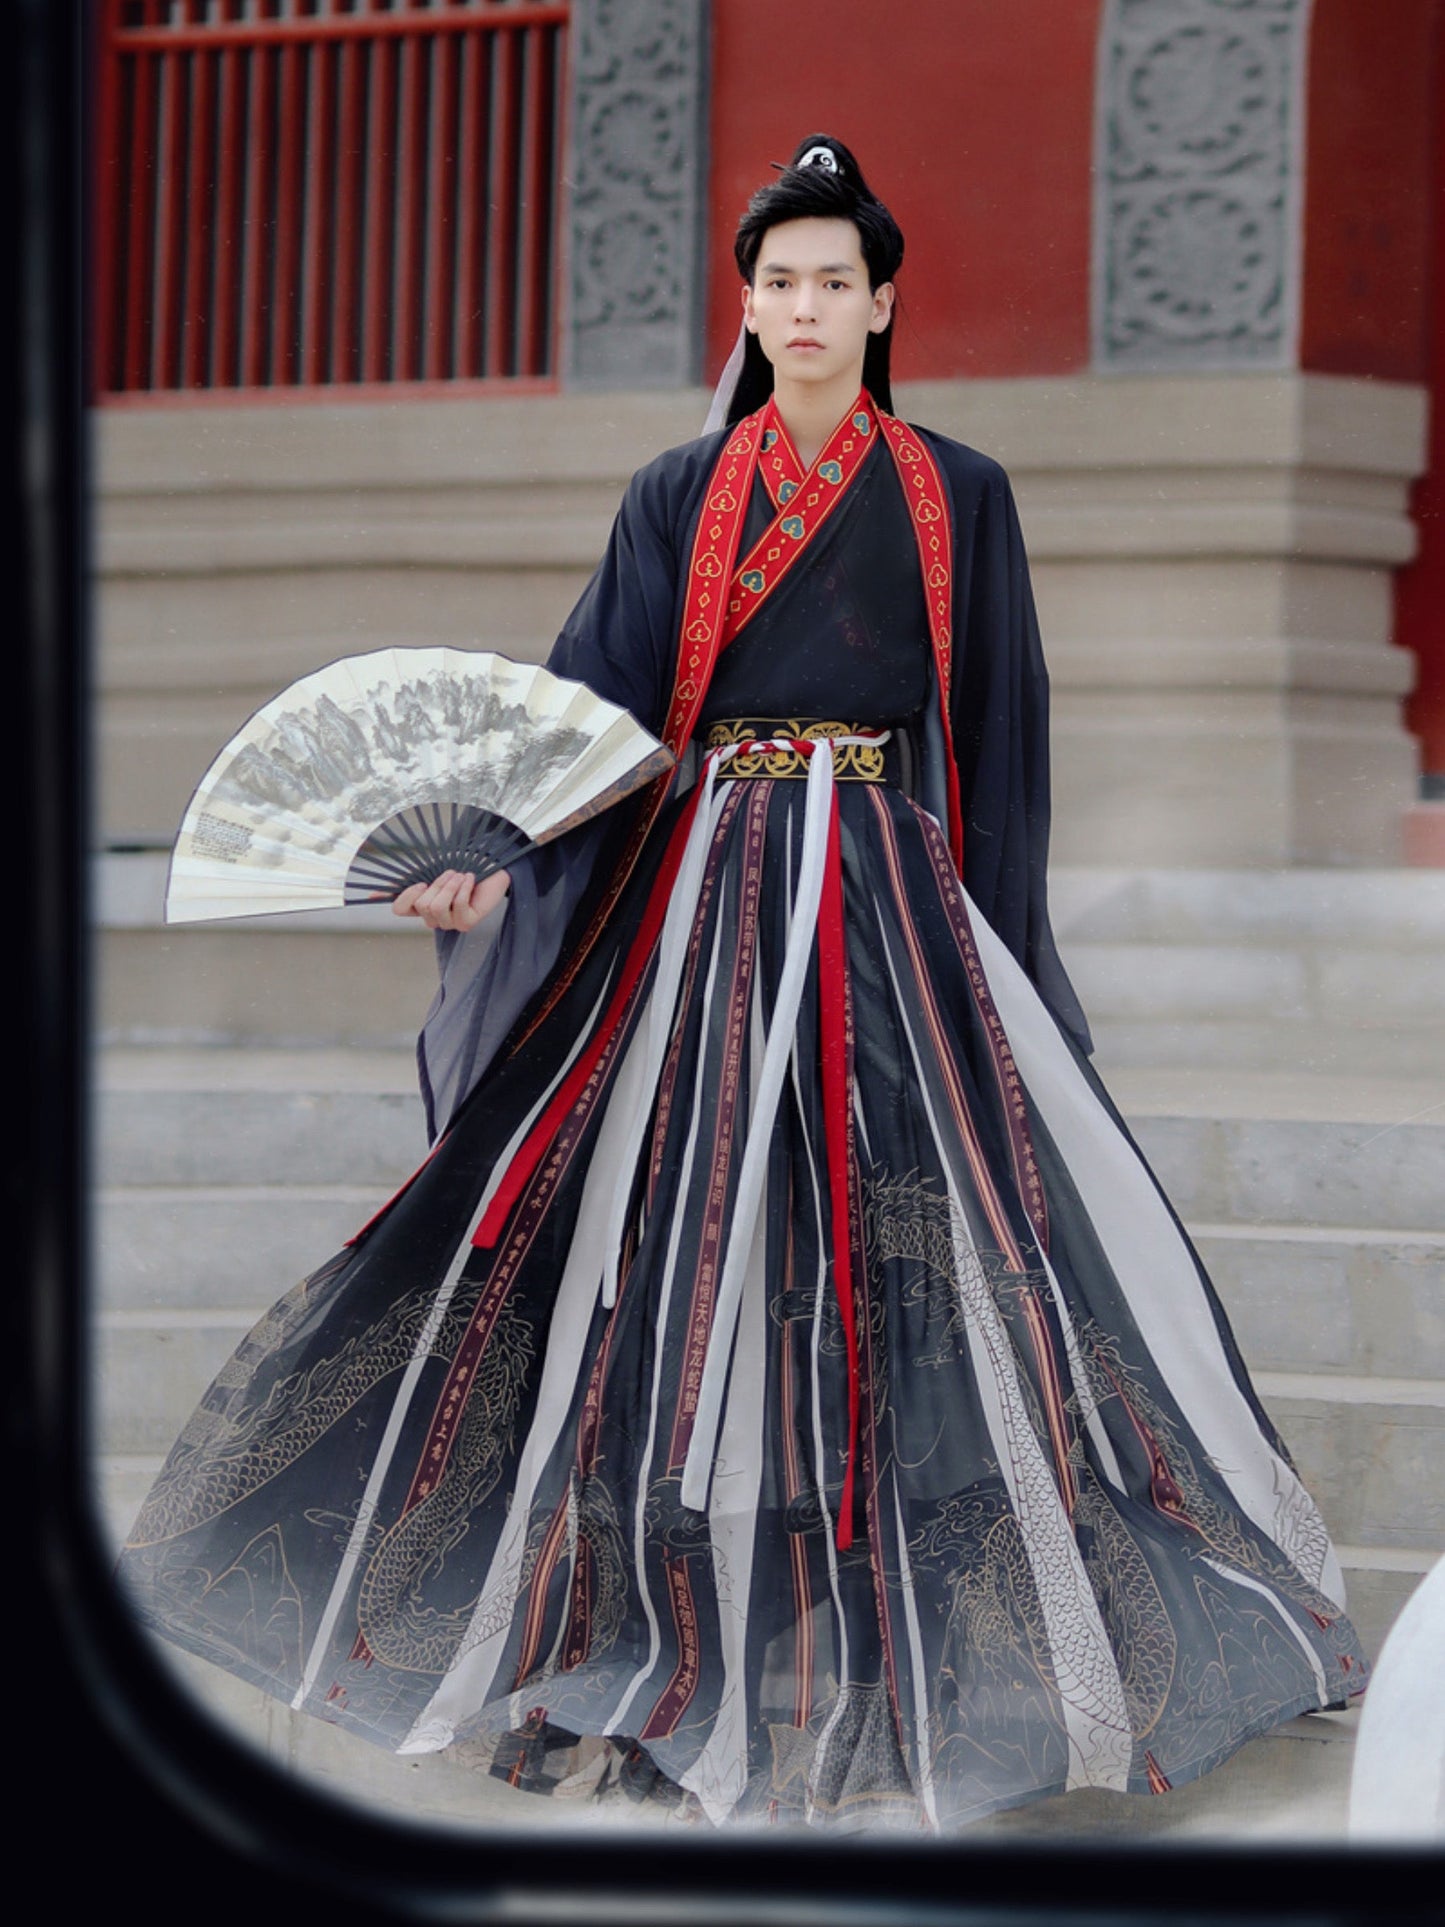 PreOder:Imperial Romance: His & Hers Hanfu Set in Black and Light Pink - Ethereal Wei-Jin Style